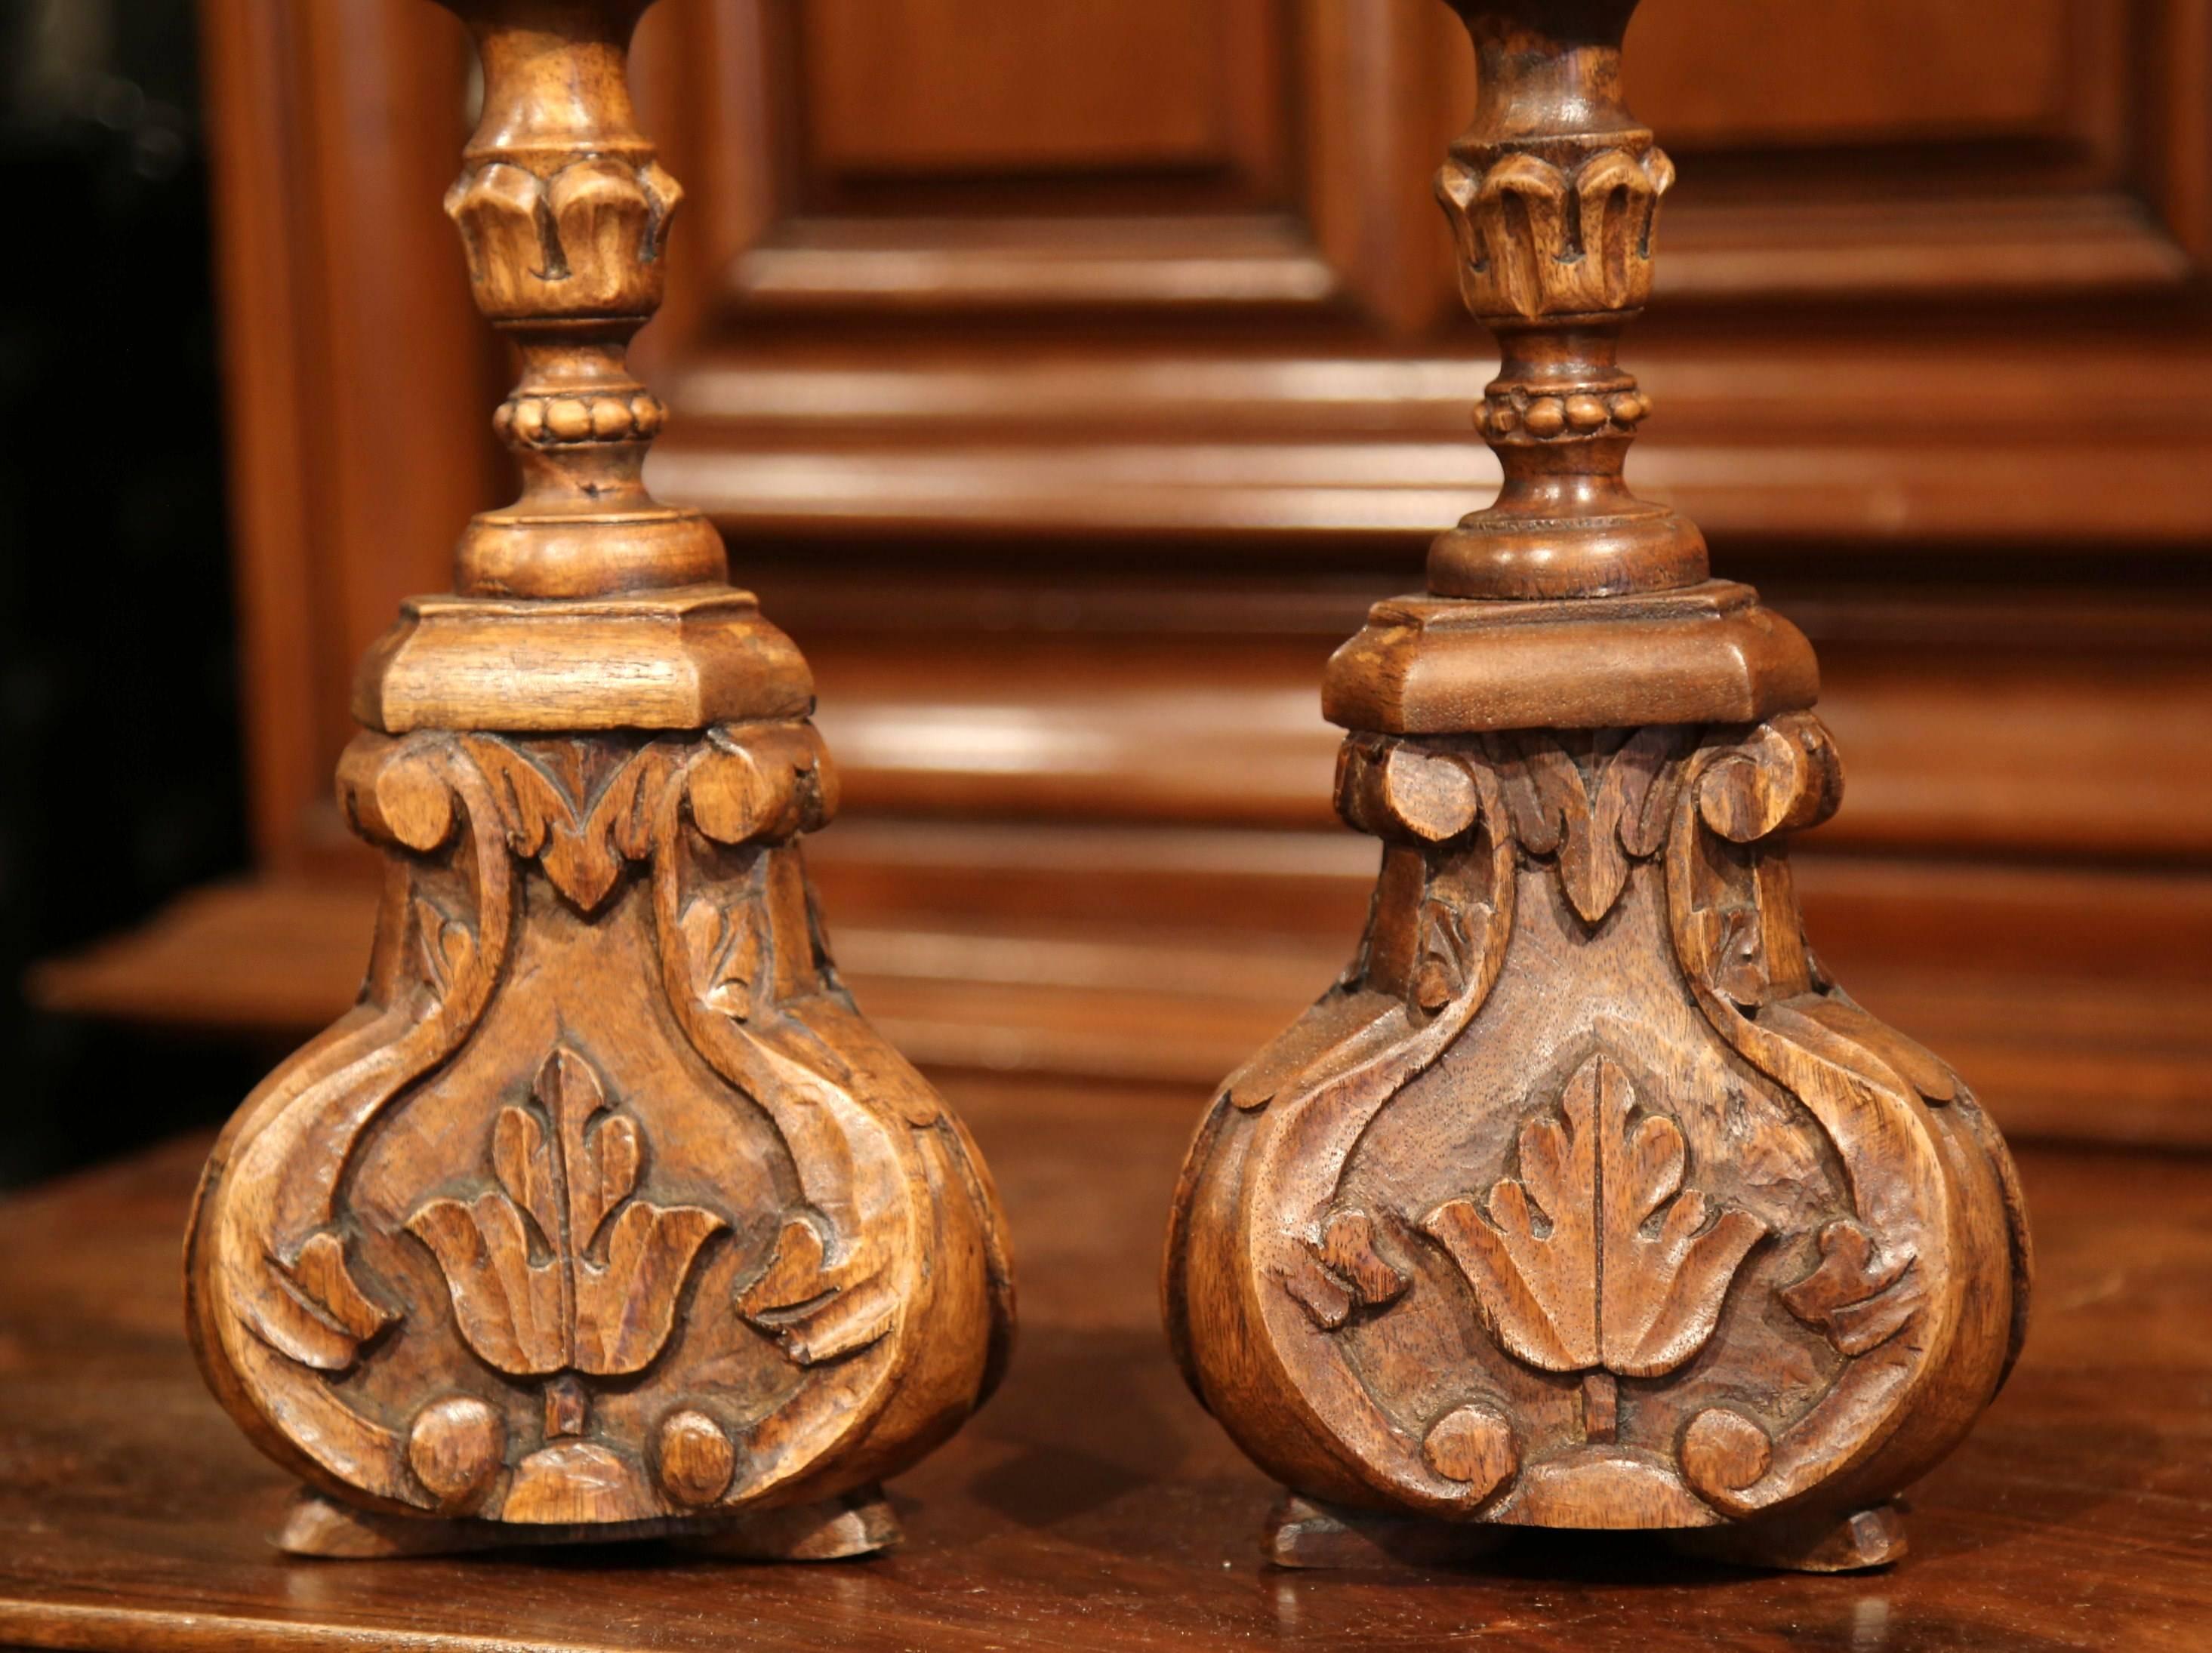 Decorate a table or mantel with this pair of beautifully hand-carved, antique fruitwood candlesticks. Crafted in France circa 1890, the altar sticks have Classic floral carvings and other decorative motifs that will fit into any style of home. Each